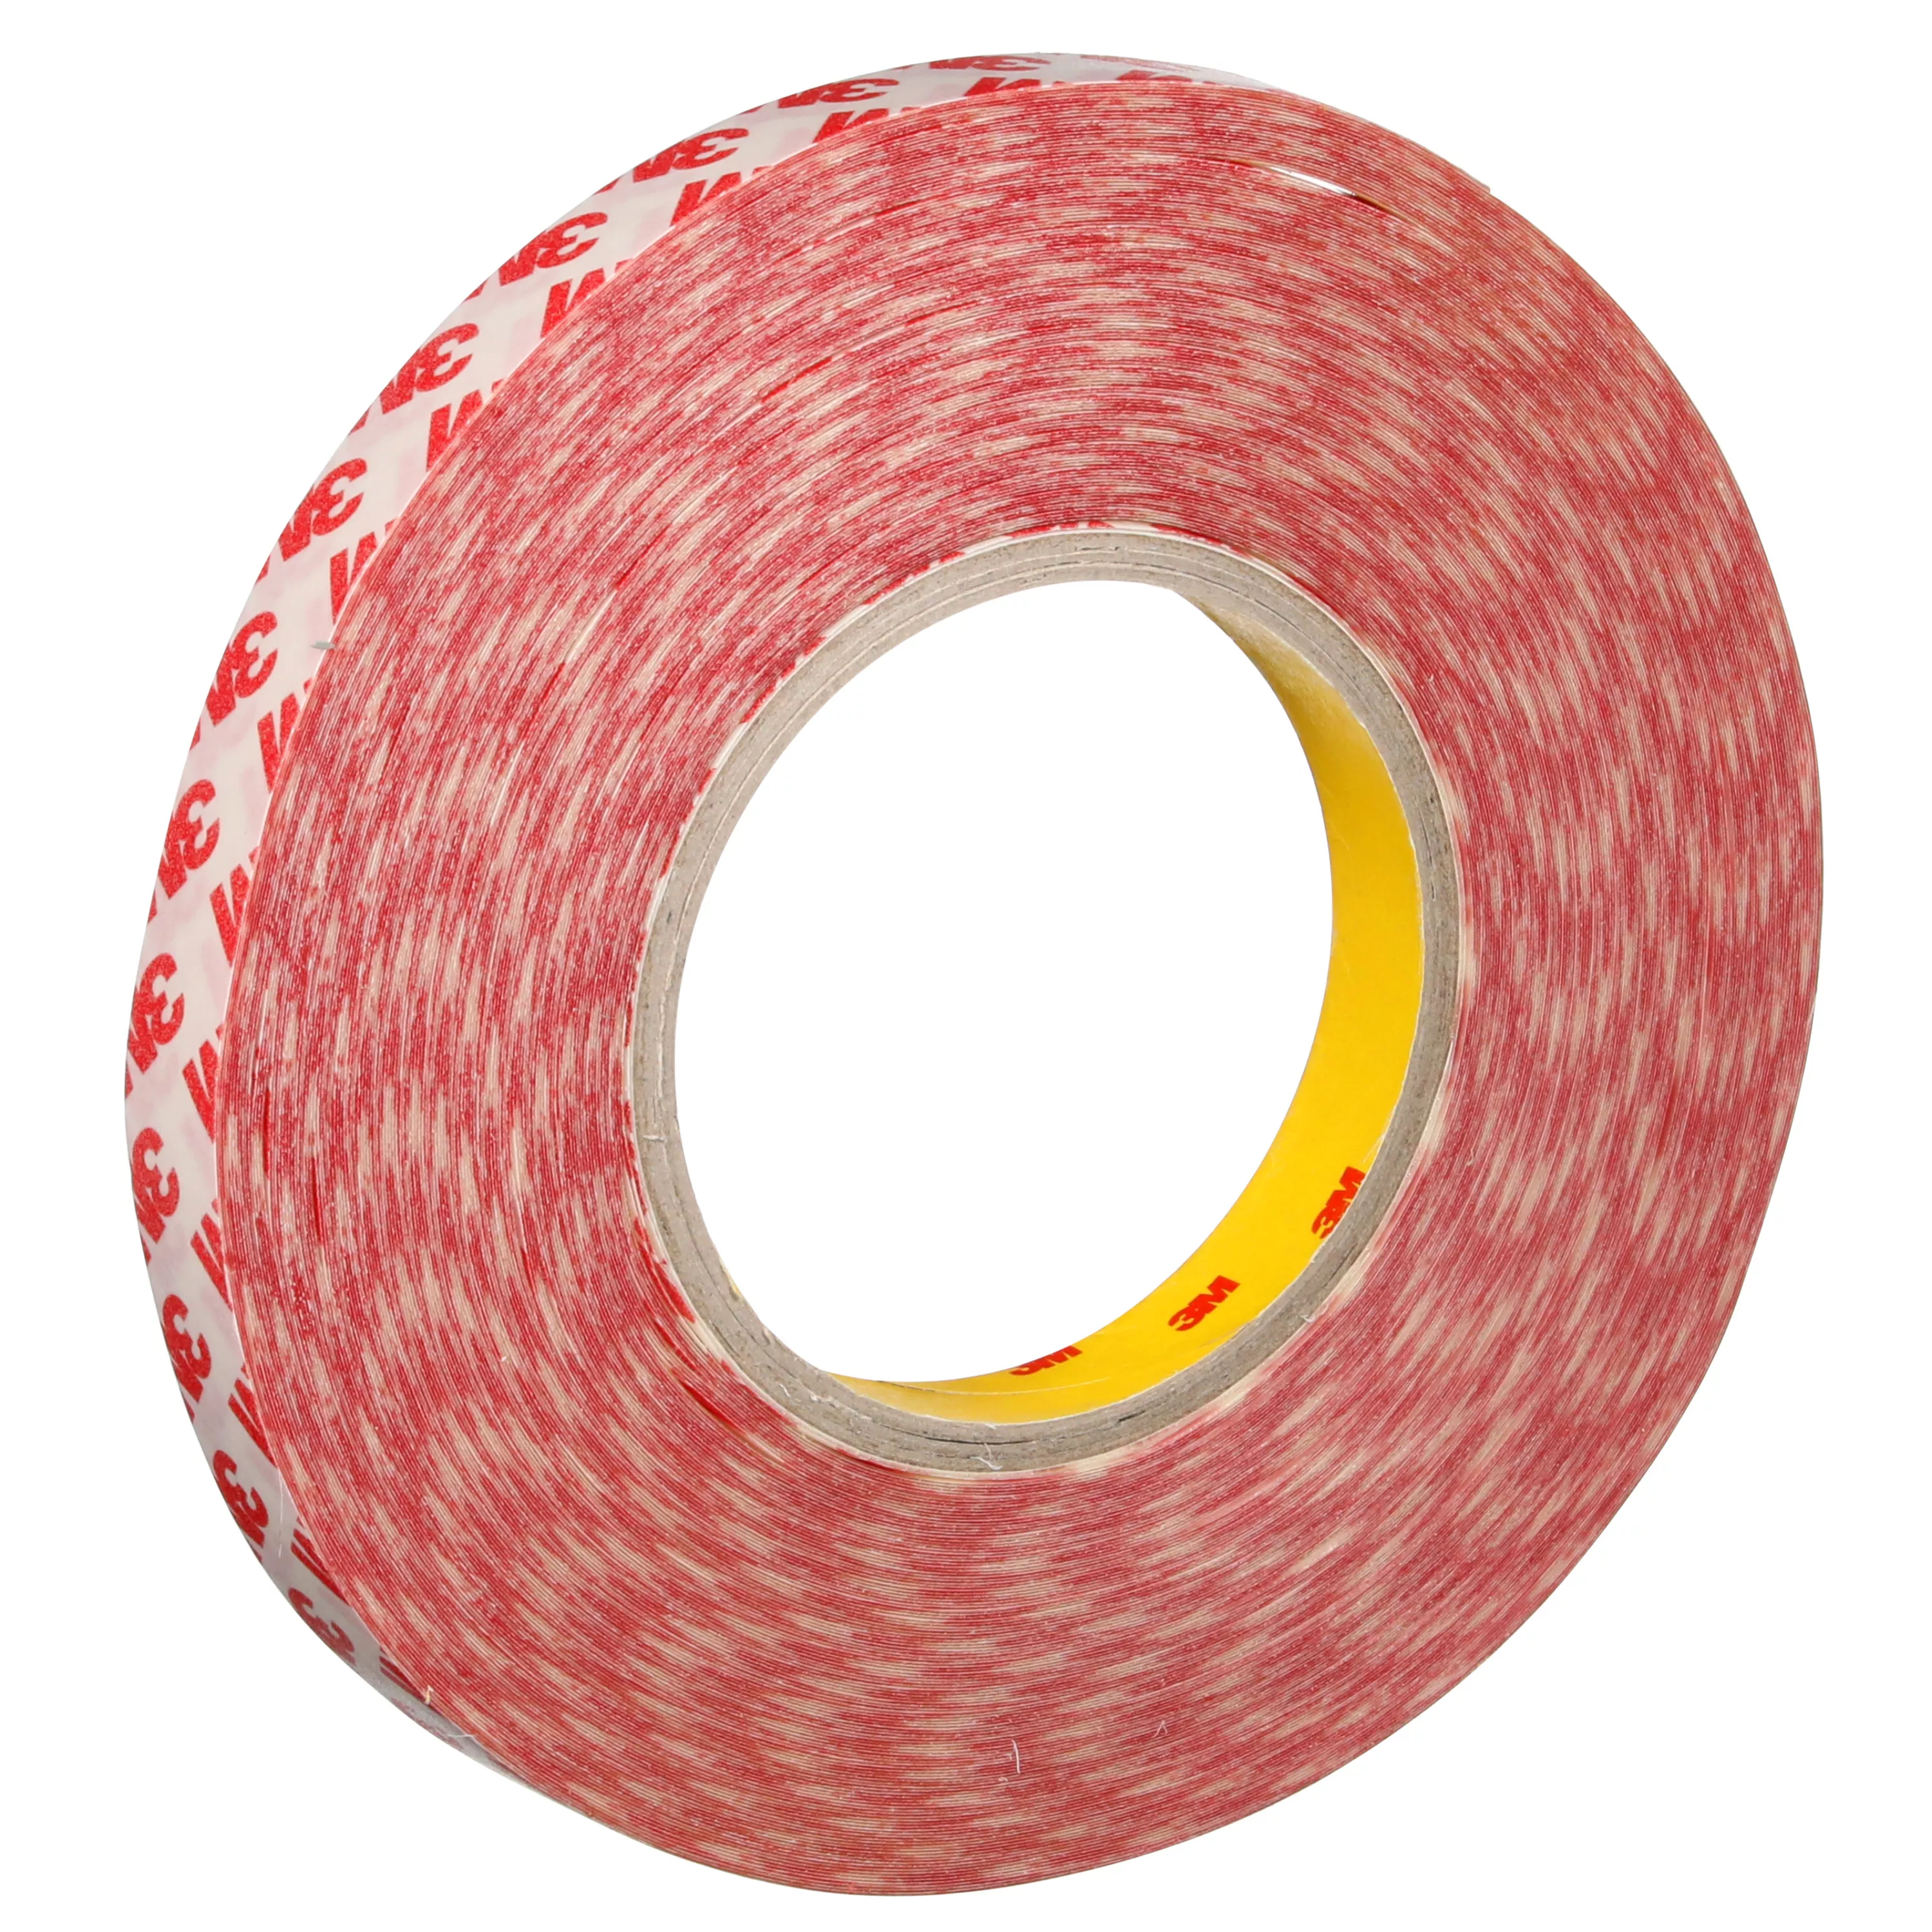 3M™ Double Coated Tape Paper Liner GPT-020, 15 mm x 50 m, 16 Roll/Case